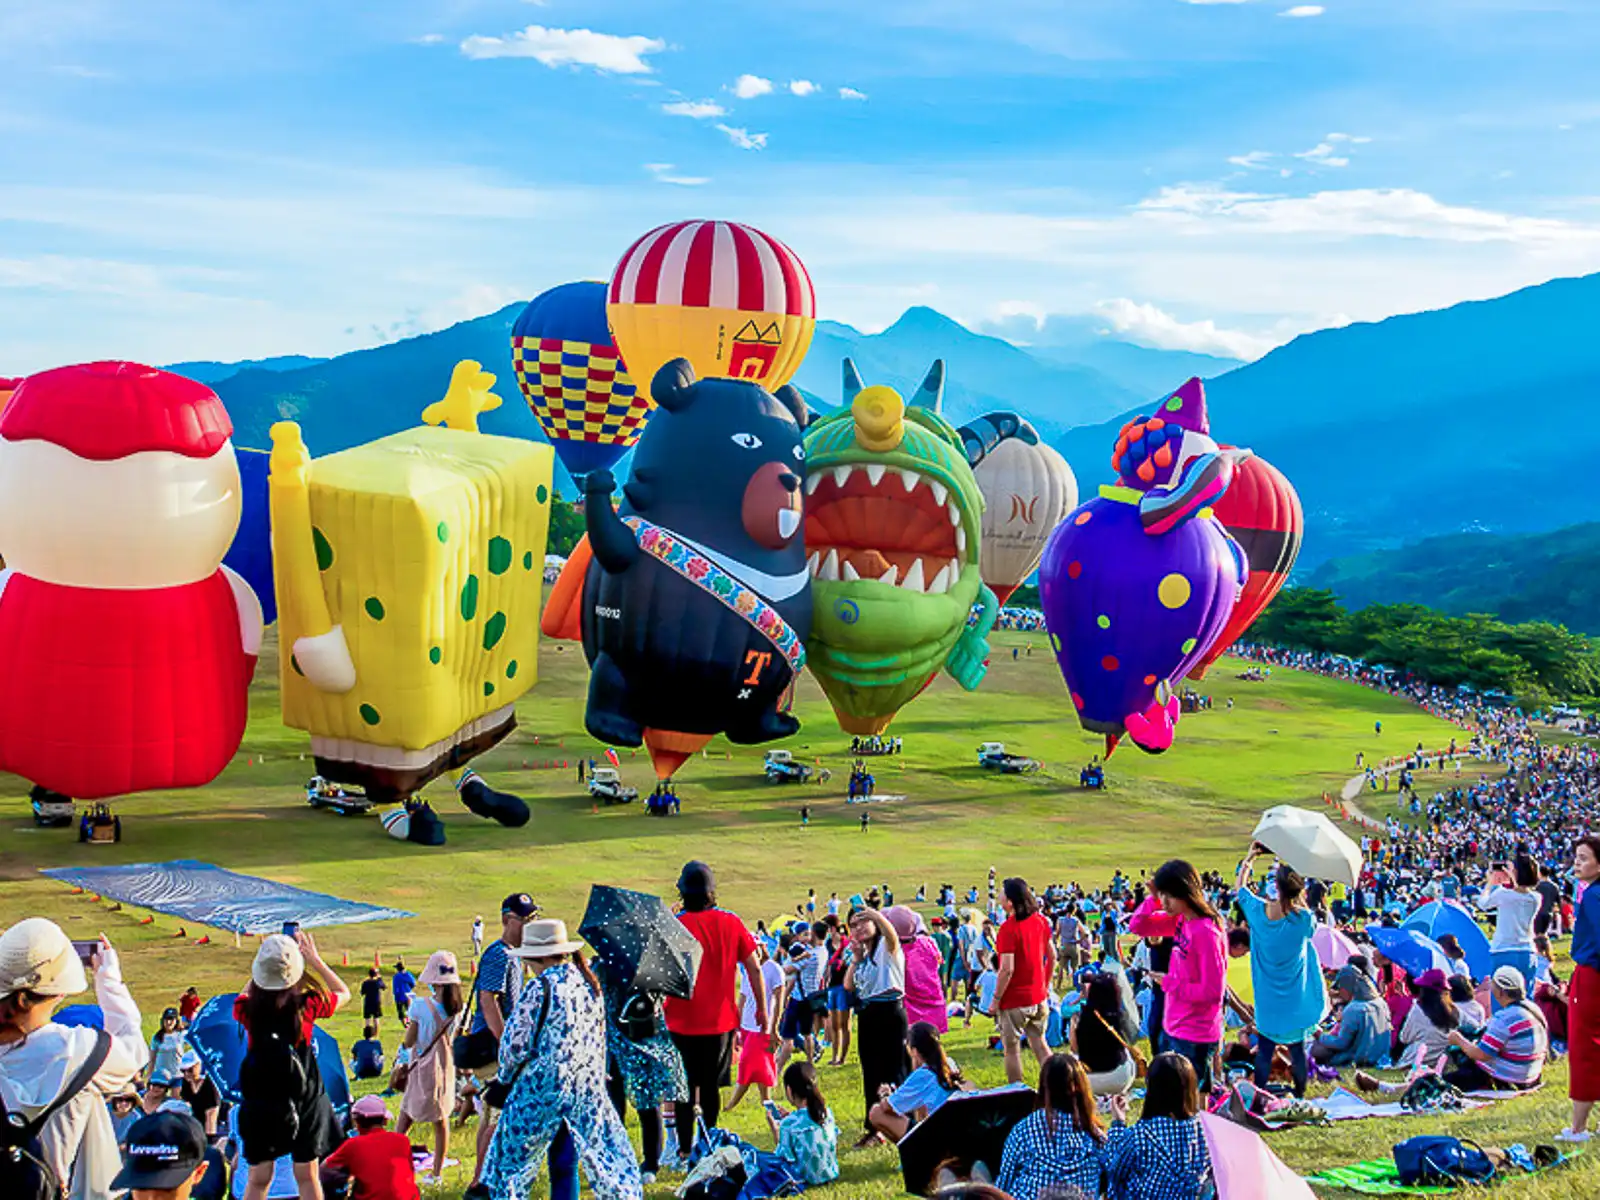 A crowd looks on as several themed balloons prepare for flight.